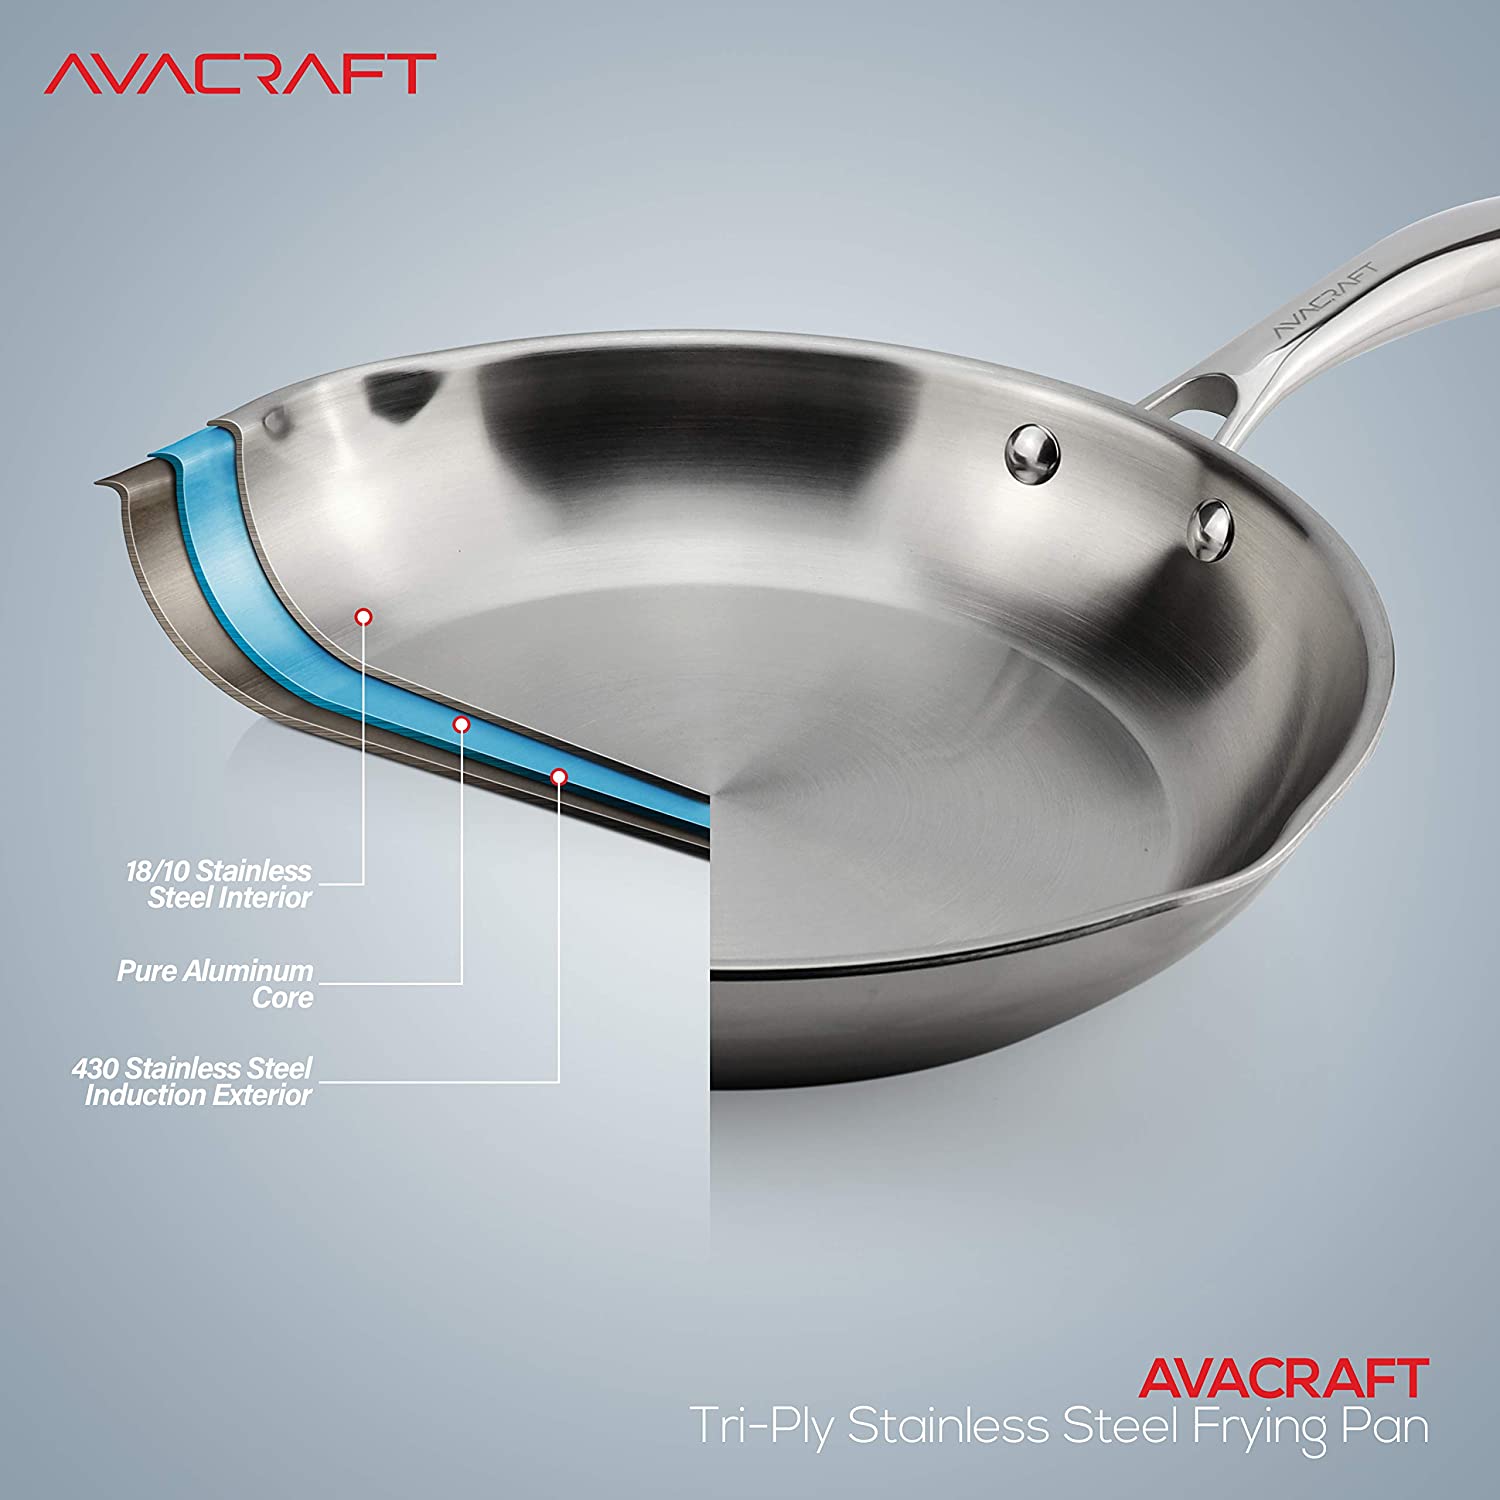 AVACRAFT 18/10 Tri-ply Stainless Steel Dutch Oven with Lid, Dutch Oven Pot  with Lid, Best Chef's Pan with Glass Lid in Pots and Pans, Induction Pot